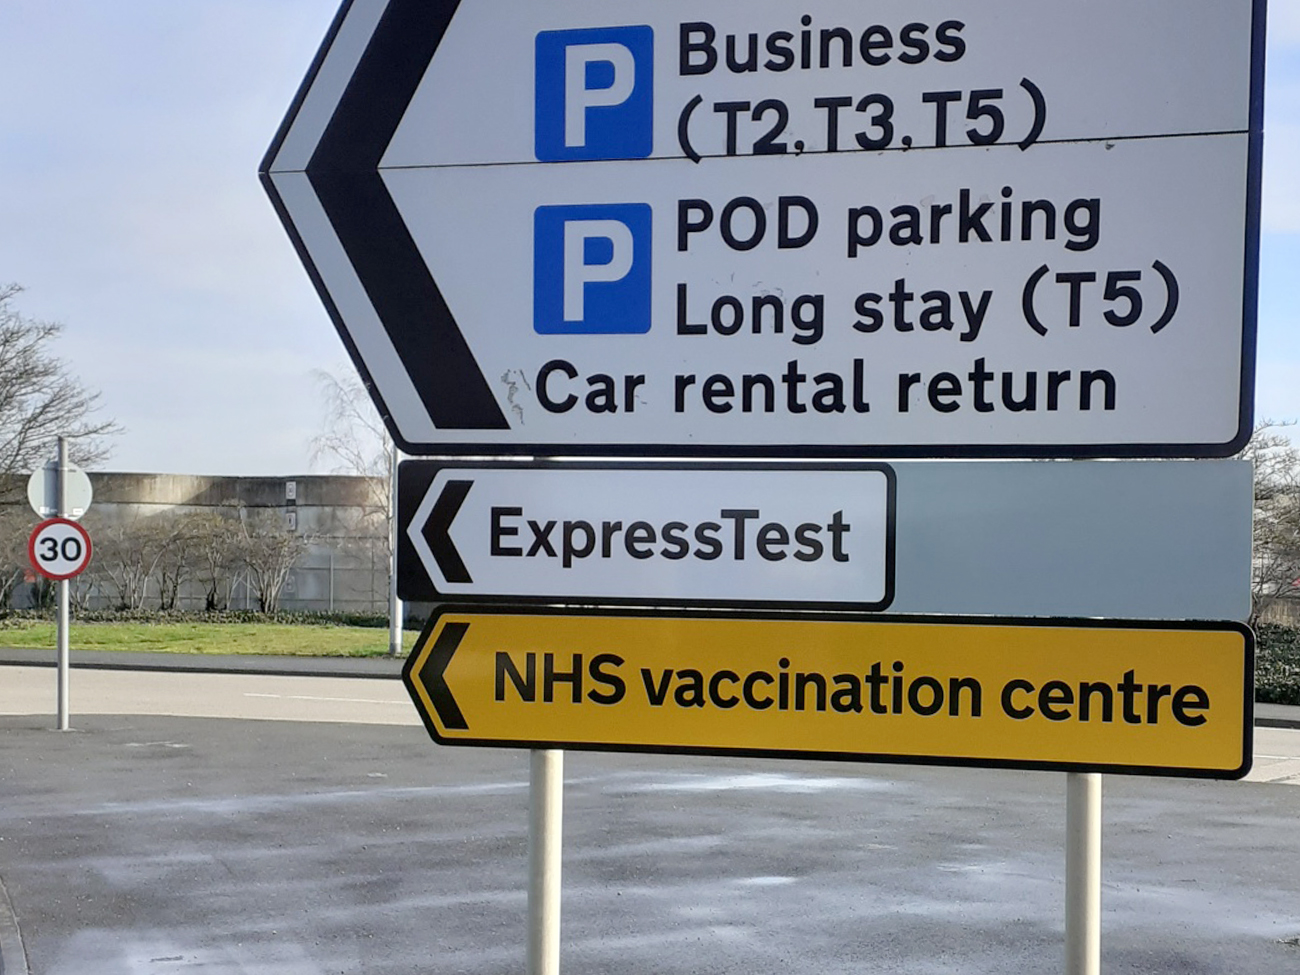 NHS Vaccination Centre highway signage